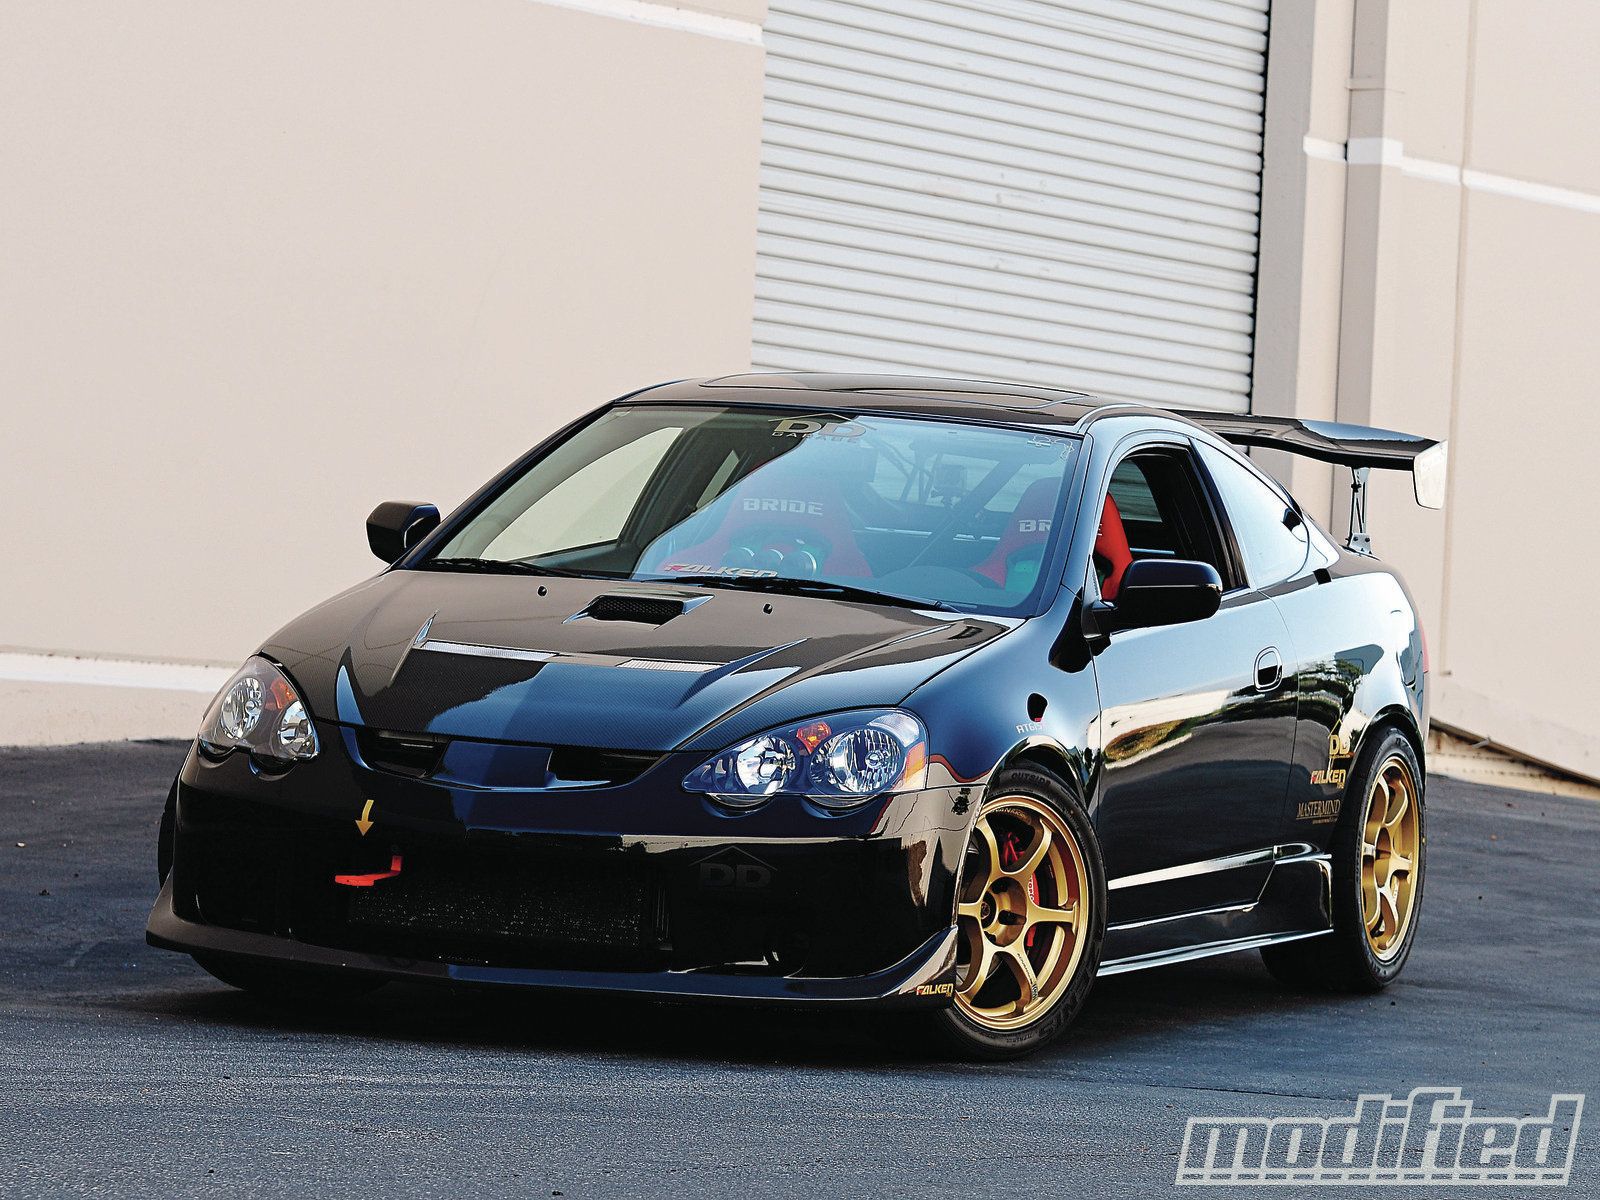 Amazing Acura RSX Pictures & Backgrounds